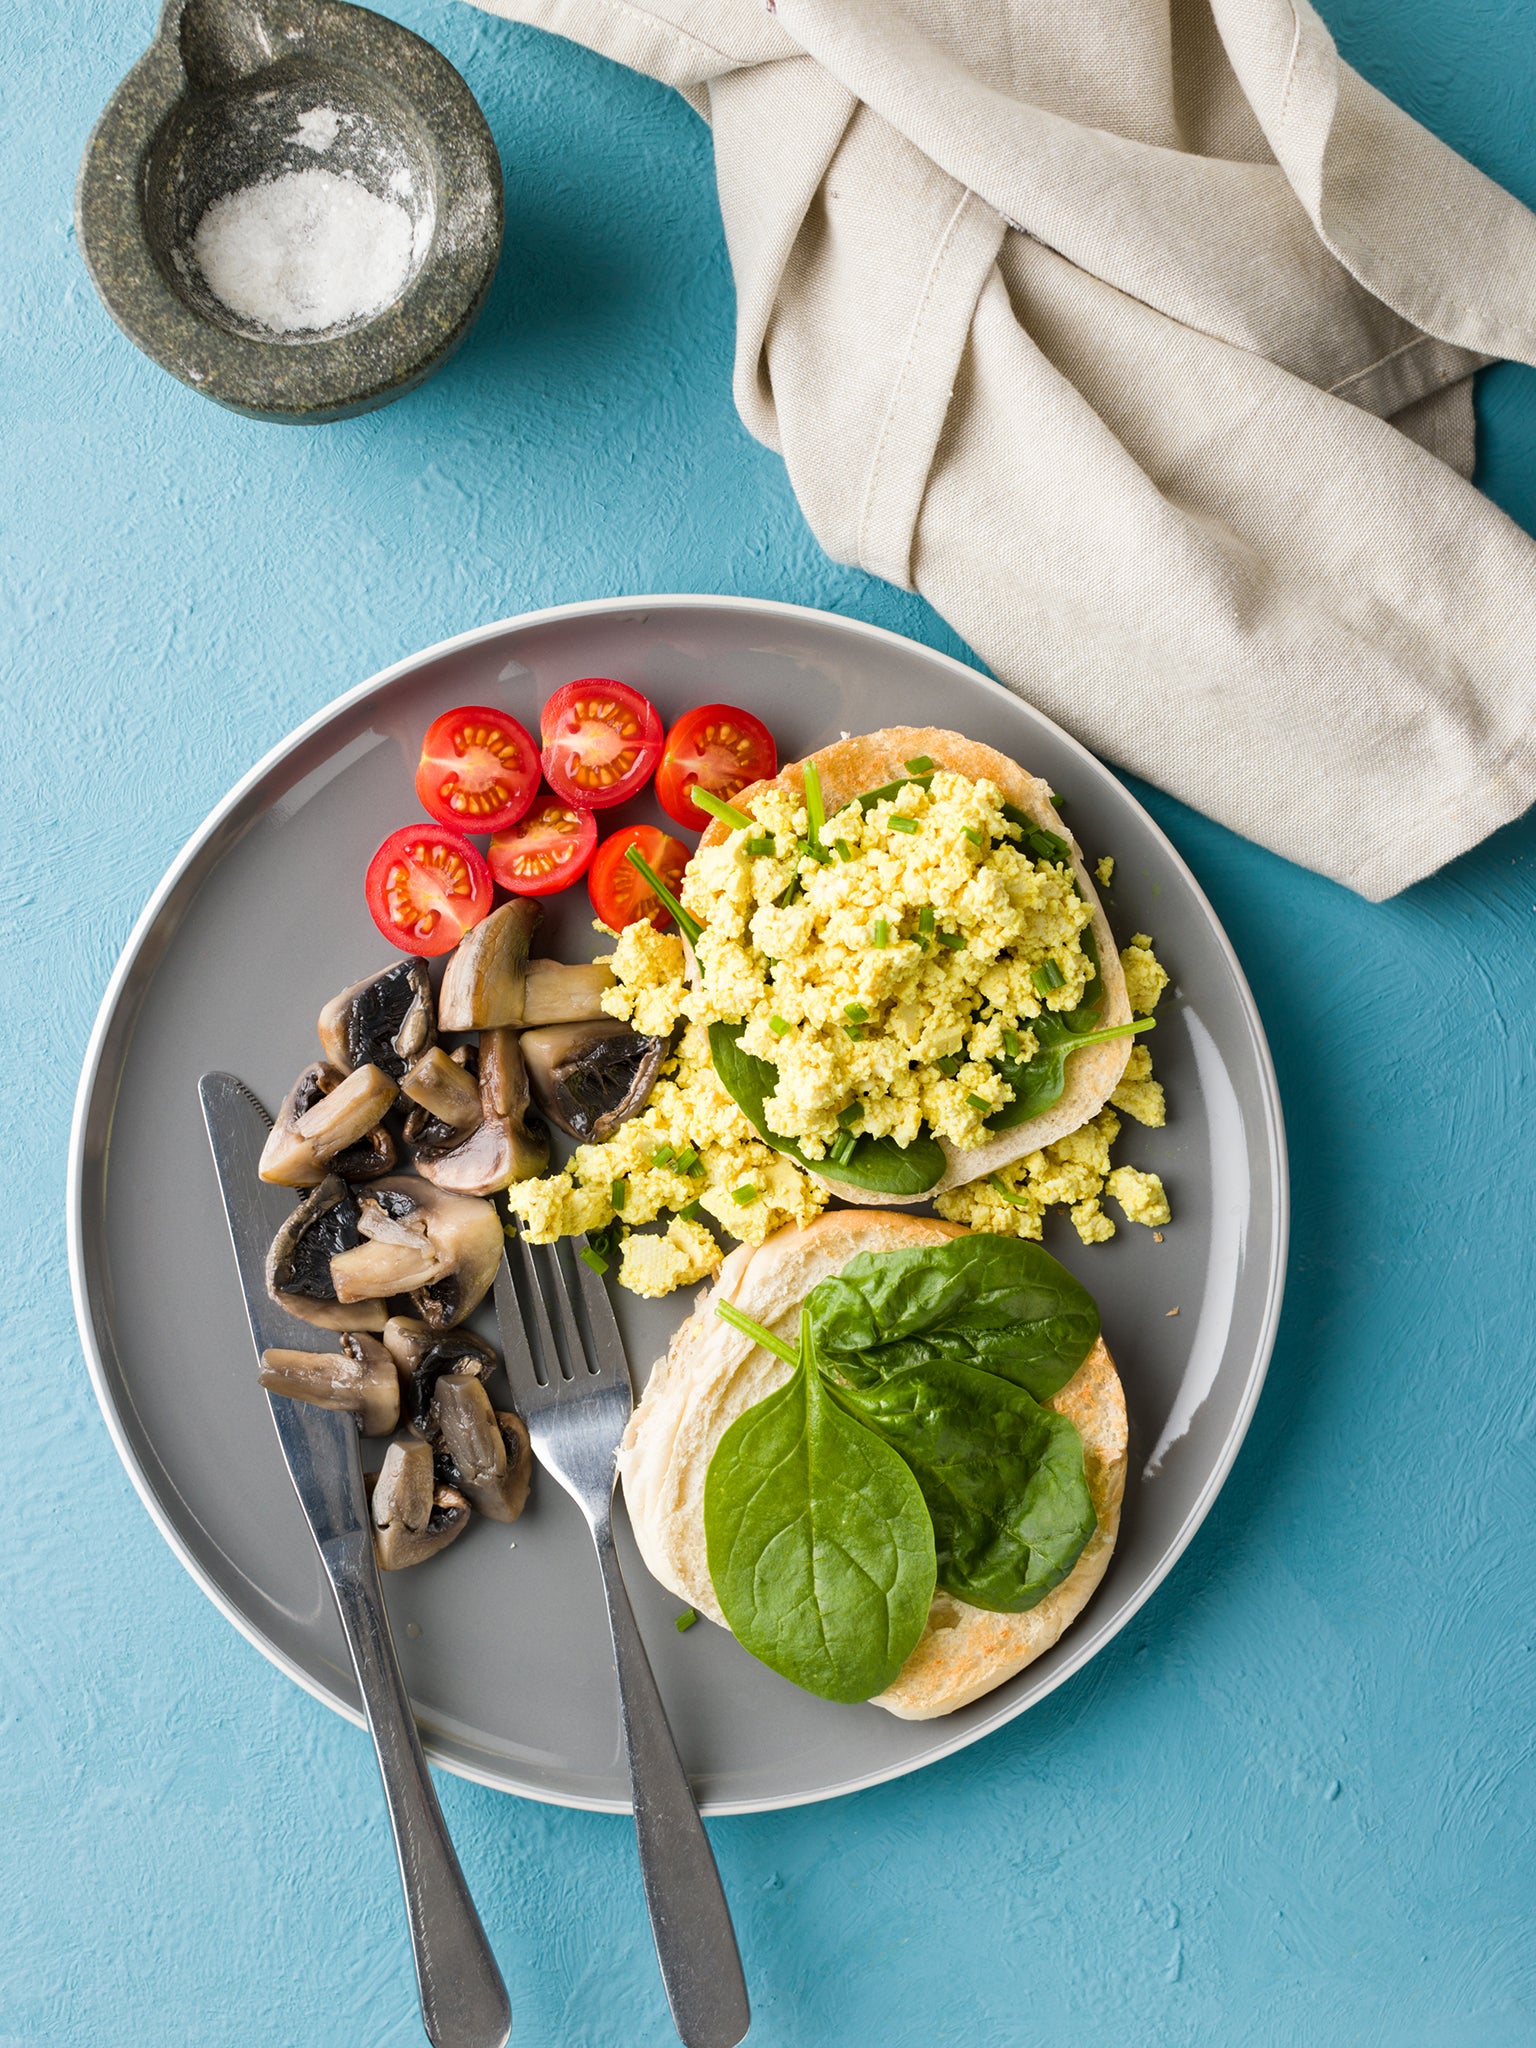 Tofu scramble is a great heart-healthy swap for eggs